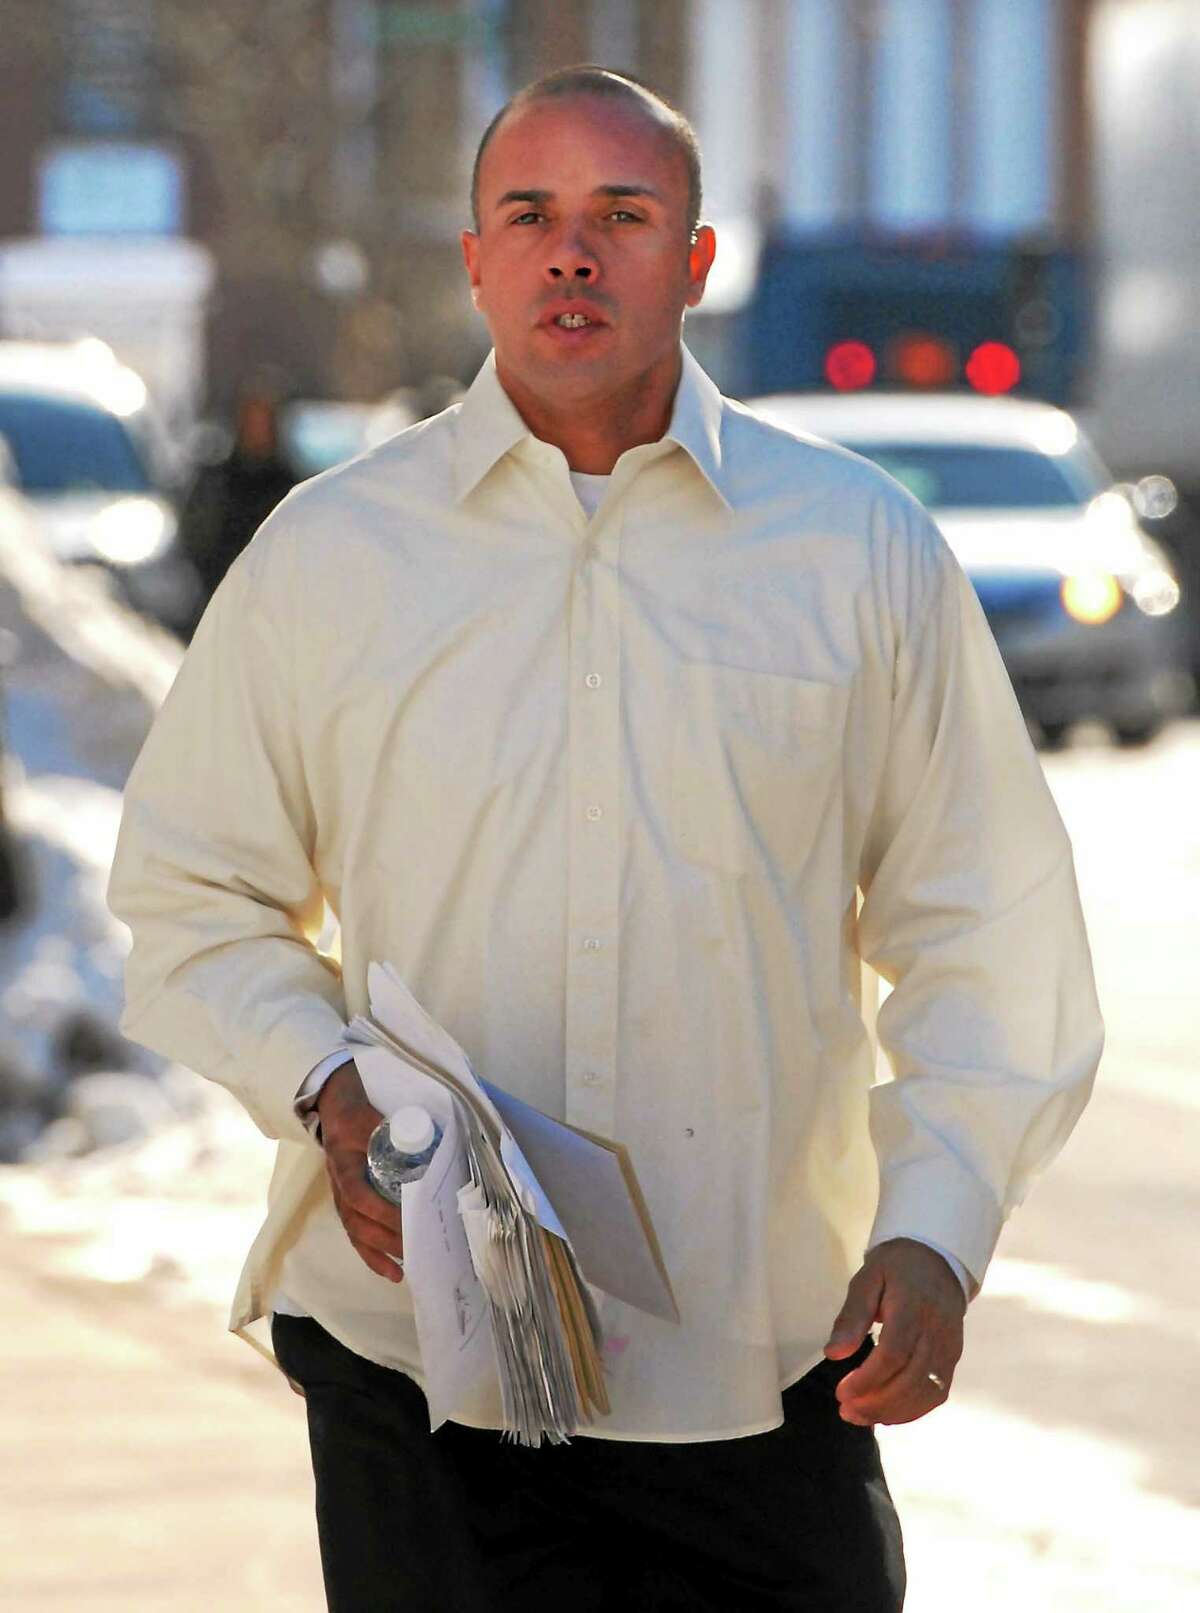 Angelo Reyes of New Haven runs to a hearing at Federal Court in Hartford in 2011.